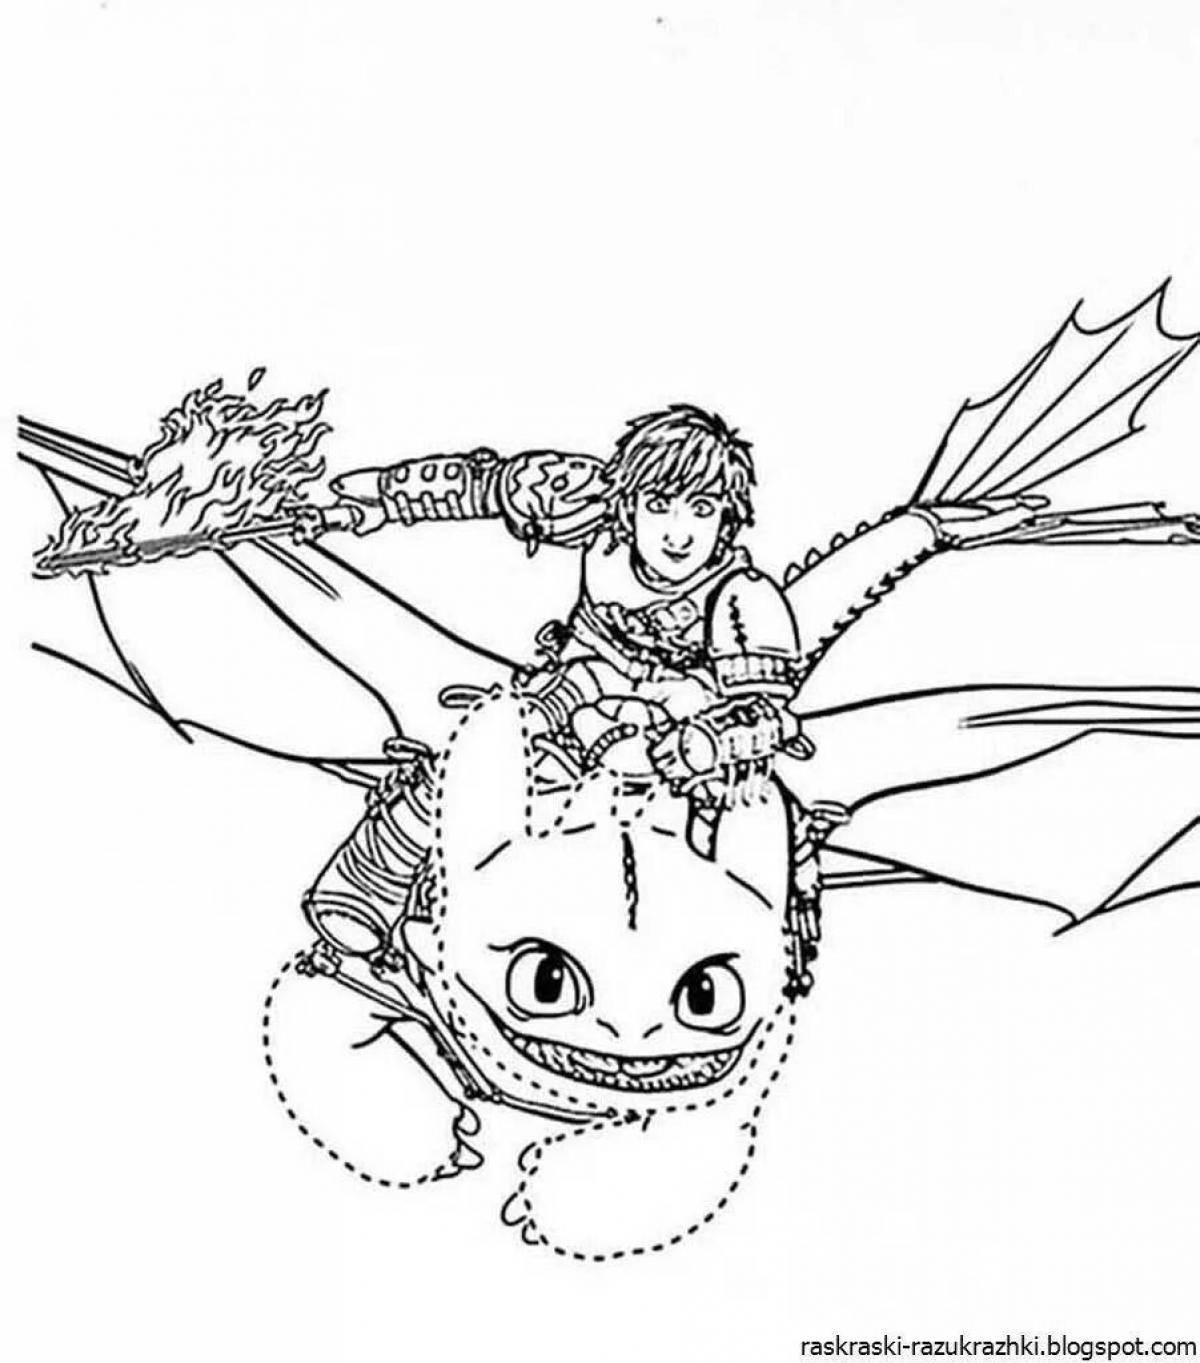 Cute toothless coloring book for kids